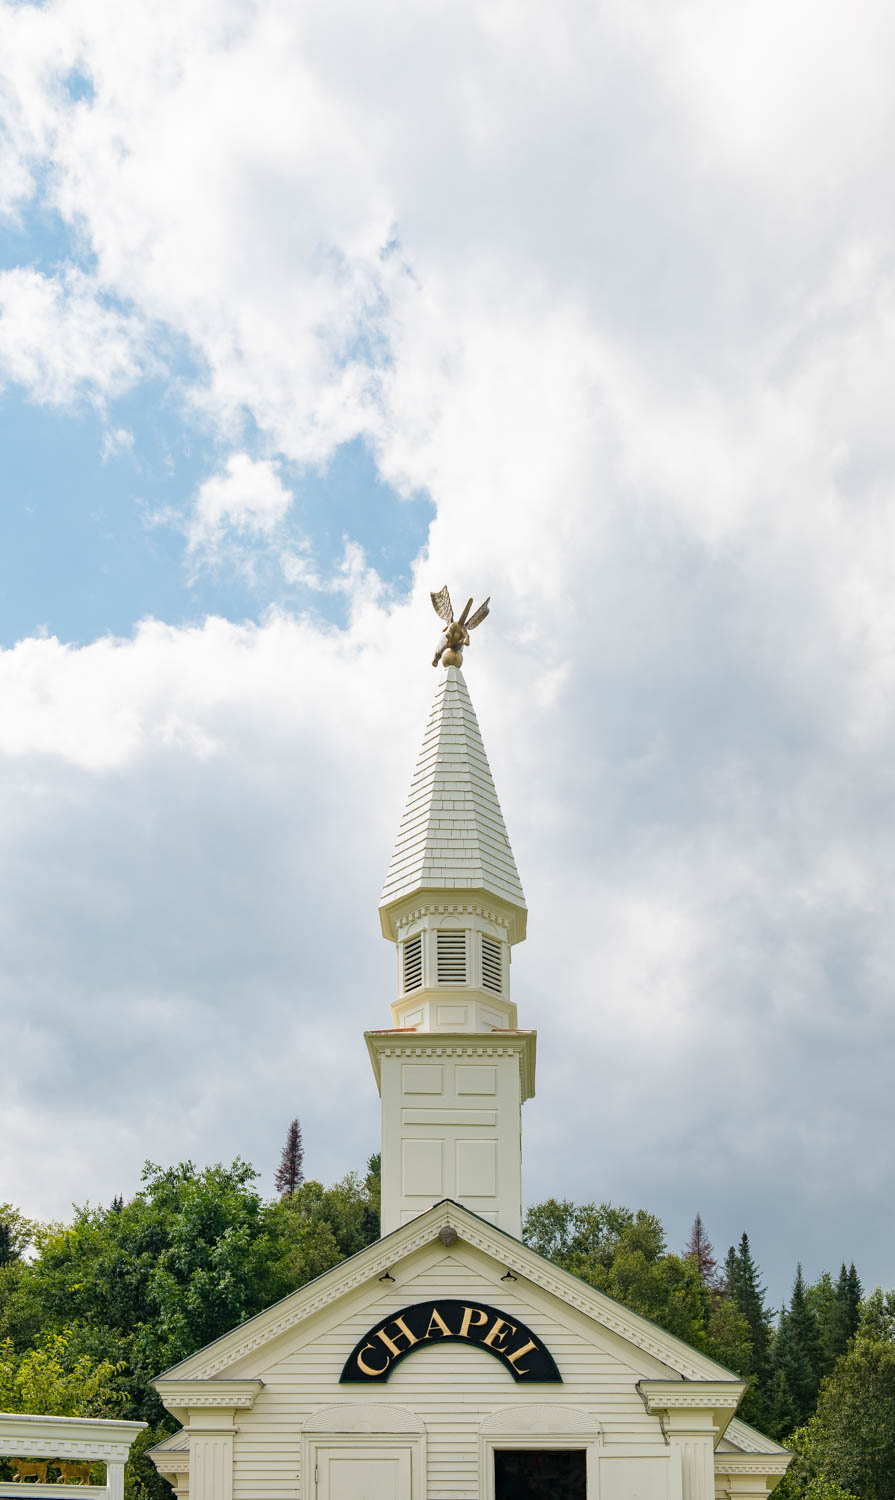 Dog Chapel  in St. Johnsbury, VT, taken  by Accidentally Wes Anderson